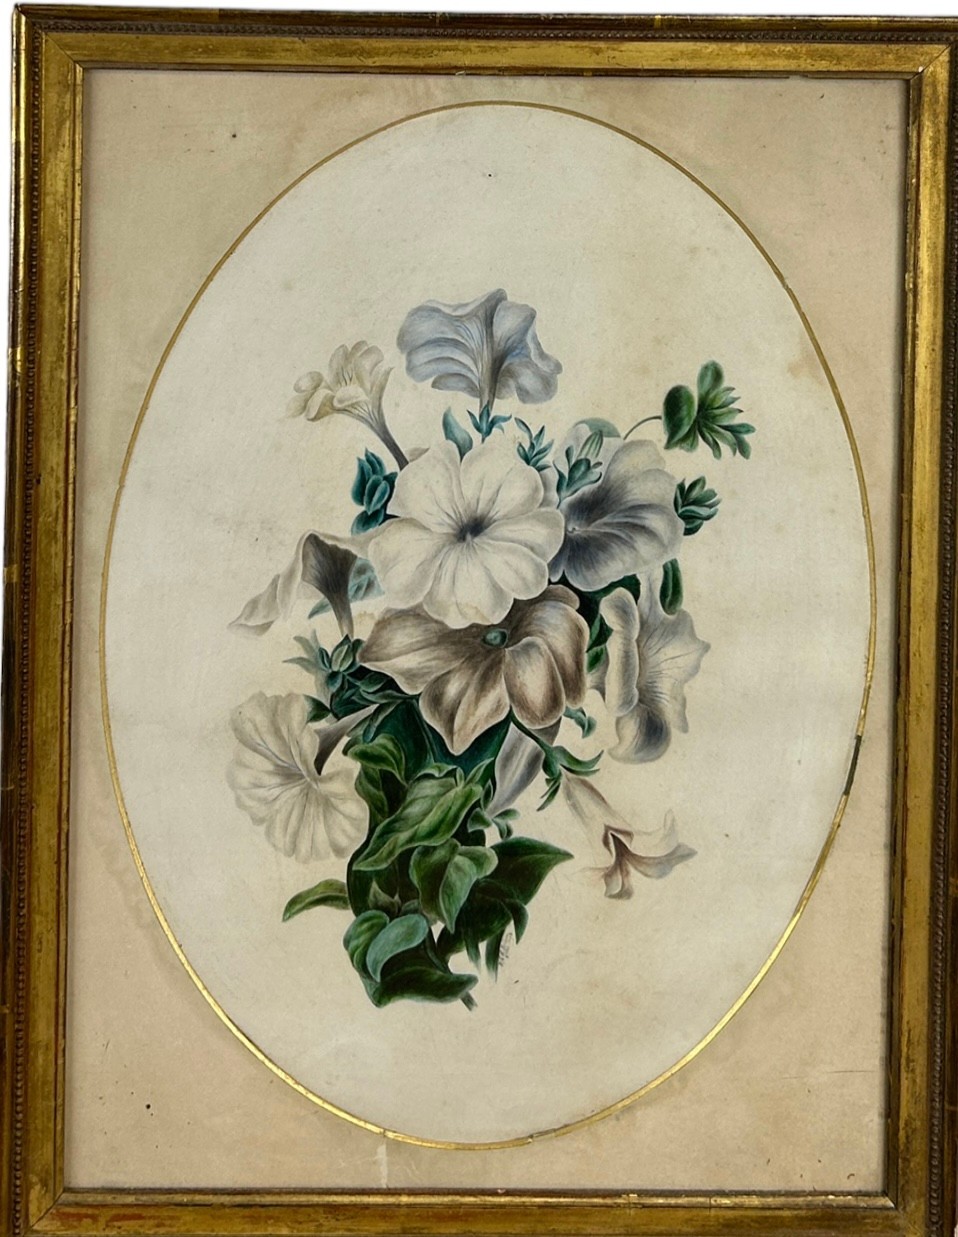 A PENCIL AND WATERCOLOUR PAINTING ON PAPER DEPICTING FLOWERS, 38cm x 28cm Oval mount, in a gilded